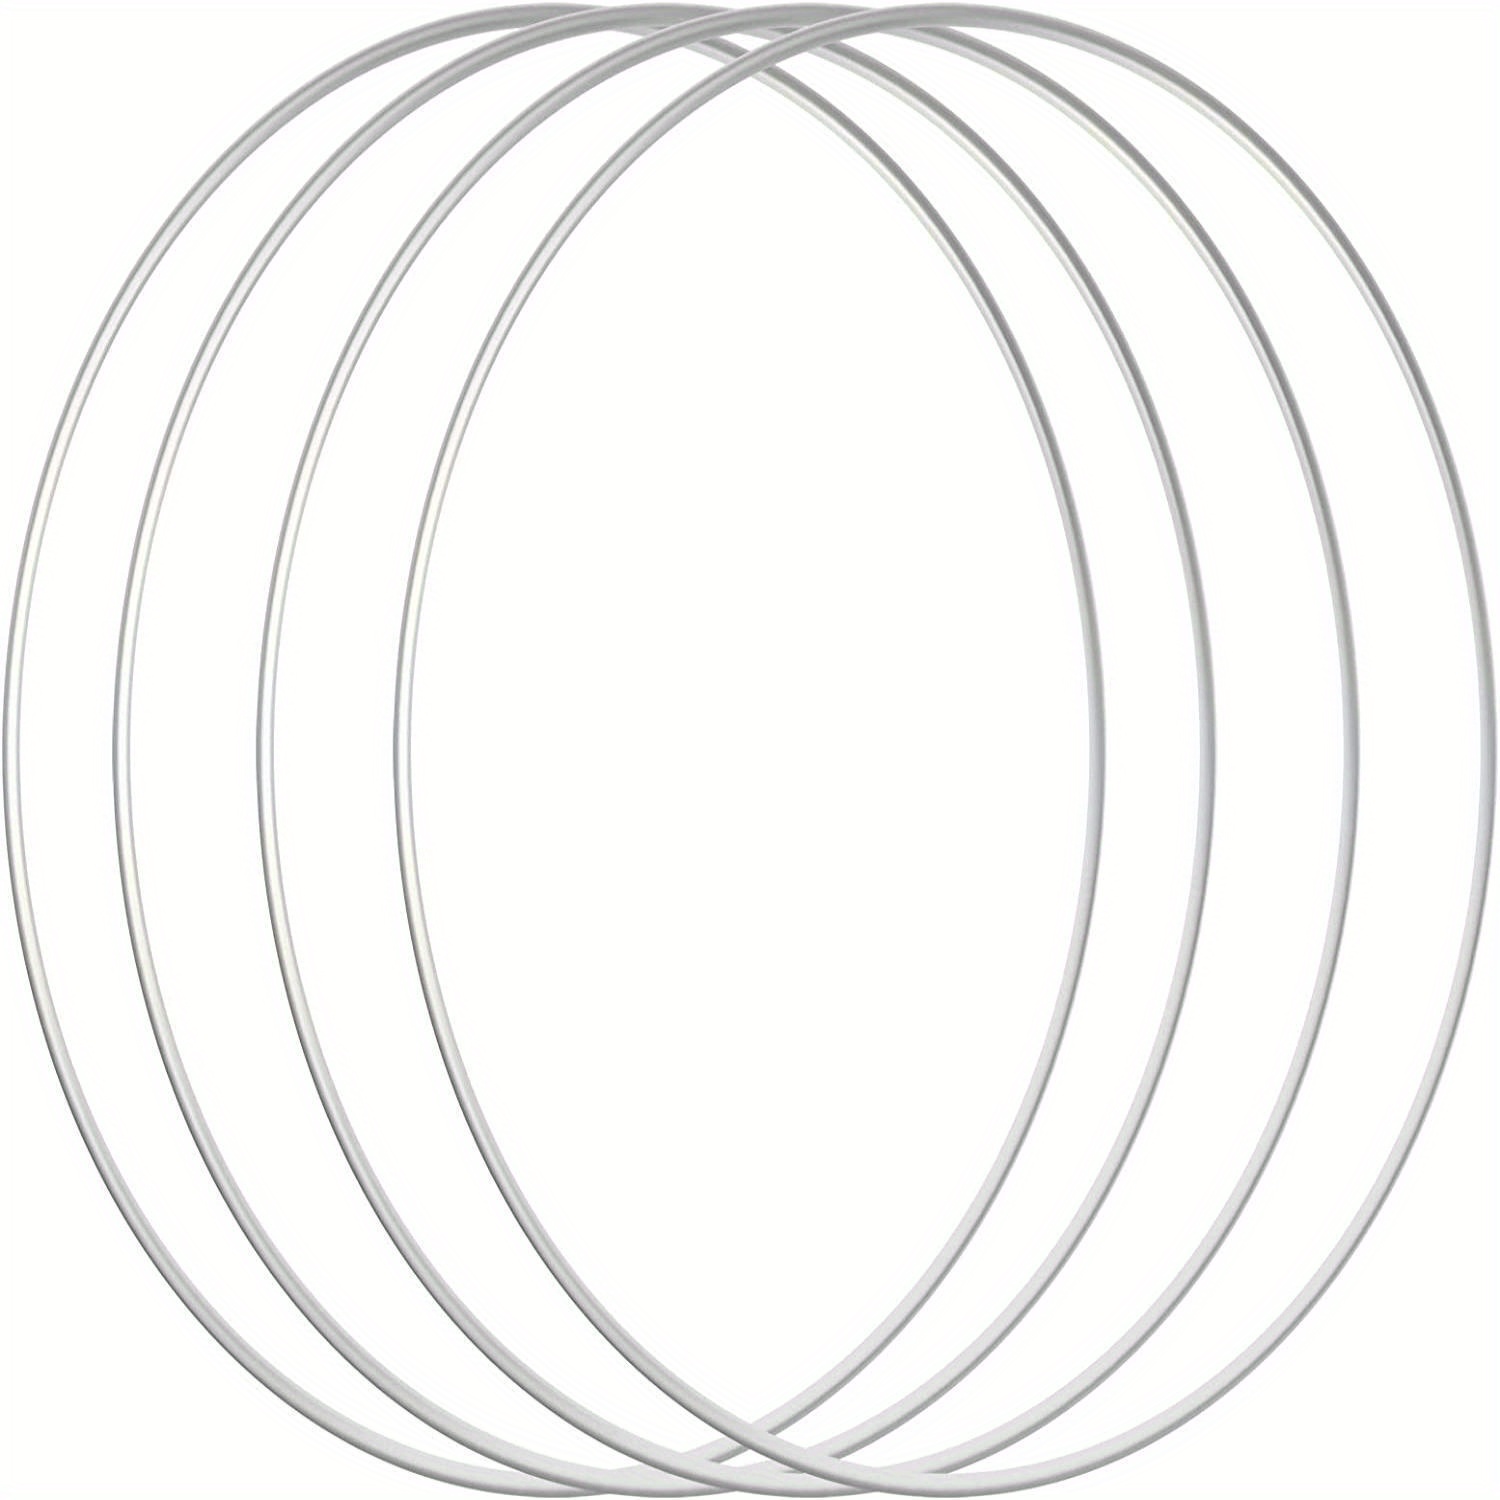 10 Pack 5 Inch Metal Rings for Crafts, Metal Hoops for Crafts, Flower Rings  for Macrame, Macrame Rings Supplies for Christmas Halloween Holiday